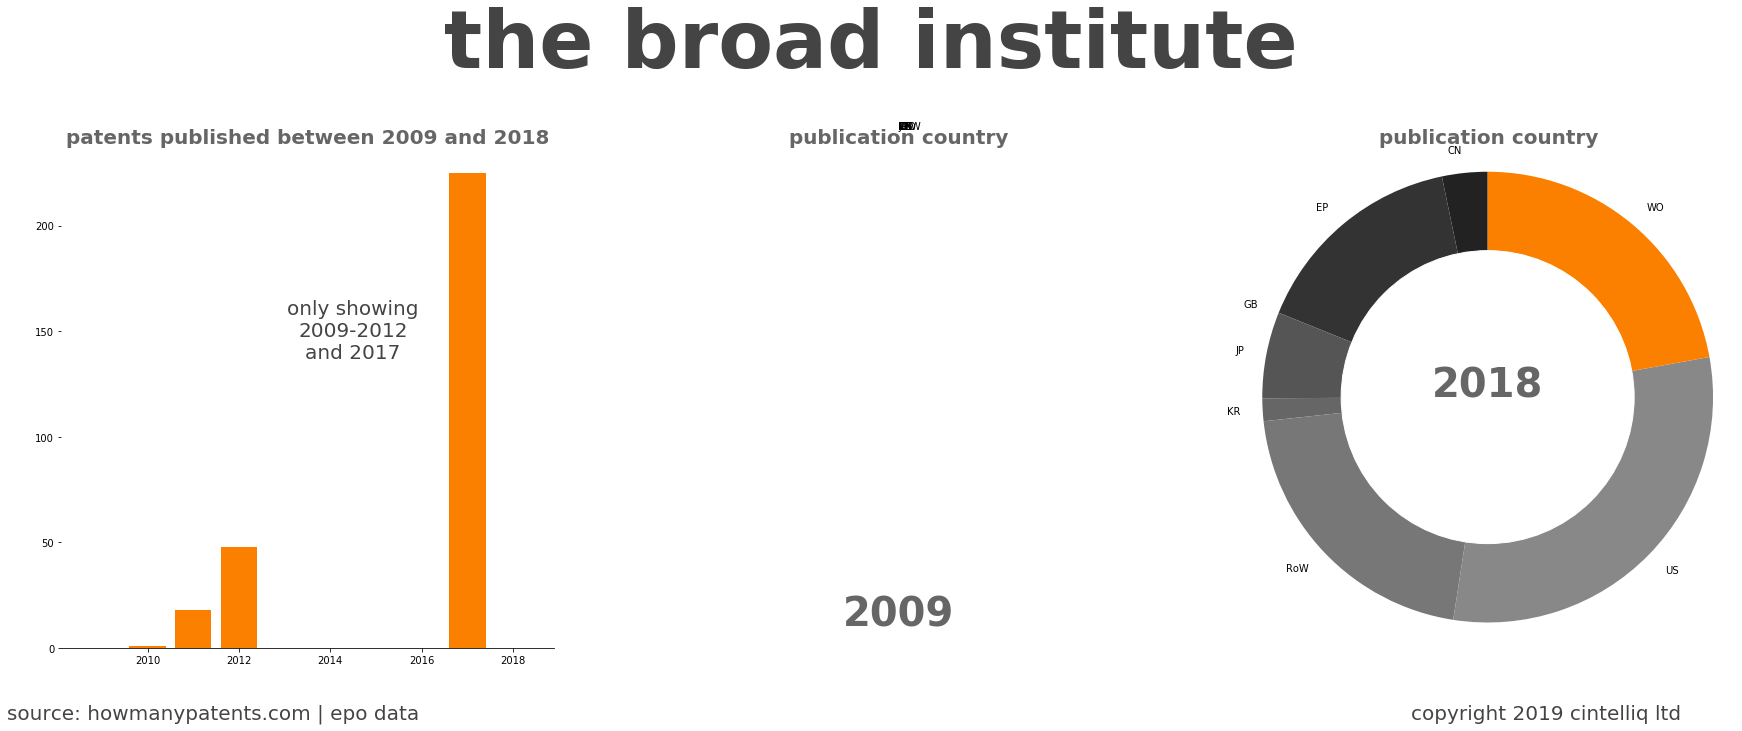 summary of patents for The Broad Institute